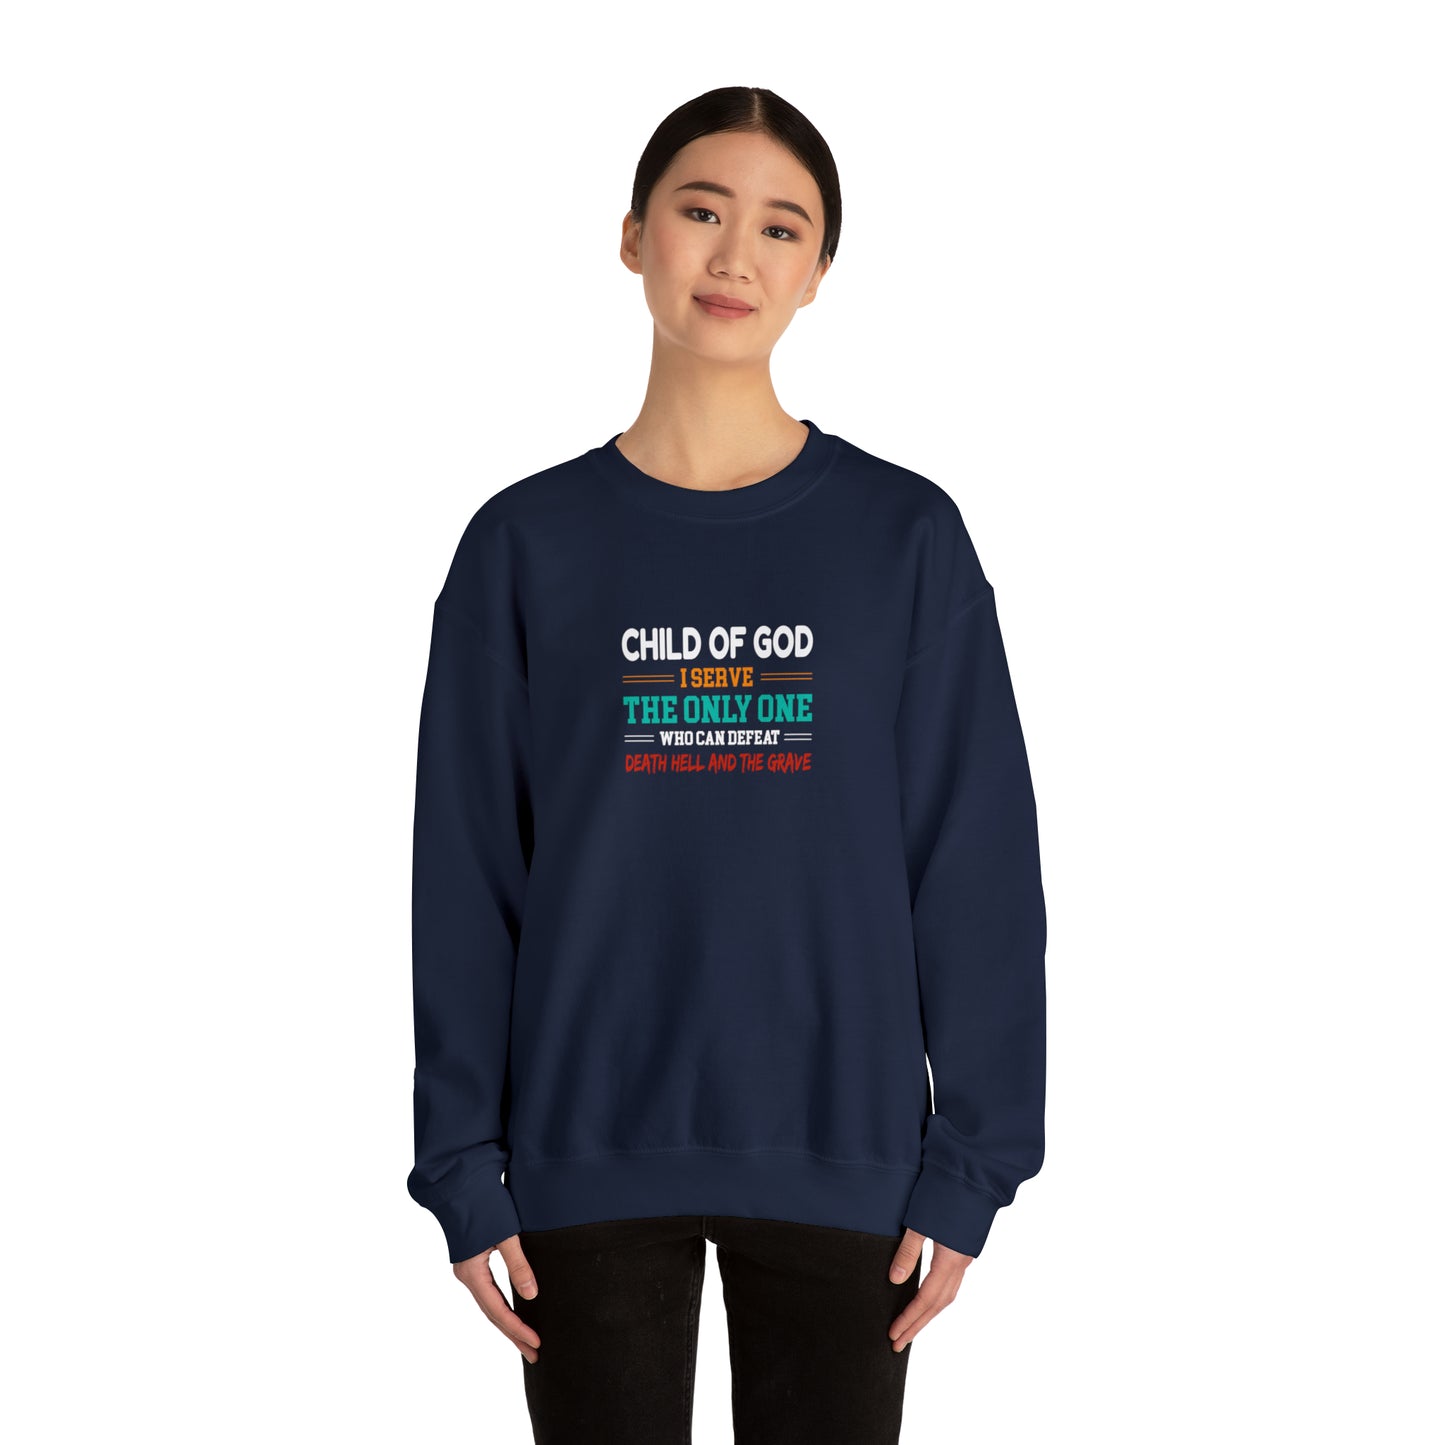 Child Of God I Serve The Only One Who Can Defeat Death Hell And The Grave Christian Unisex Heavy Blend™ Crewneck Sweatshirt Printify